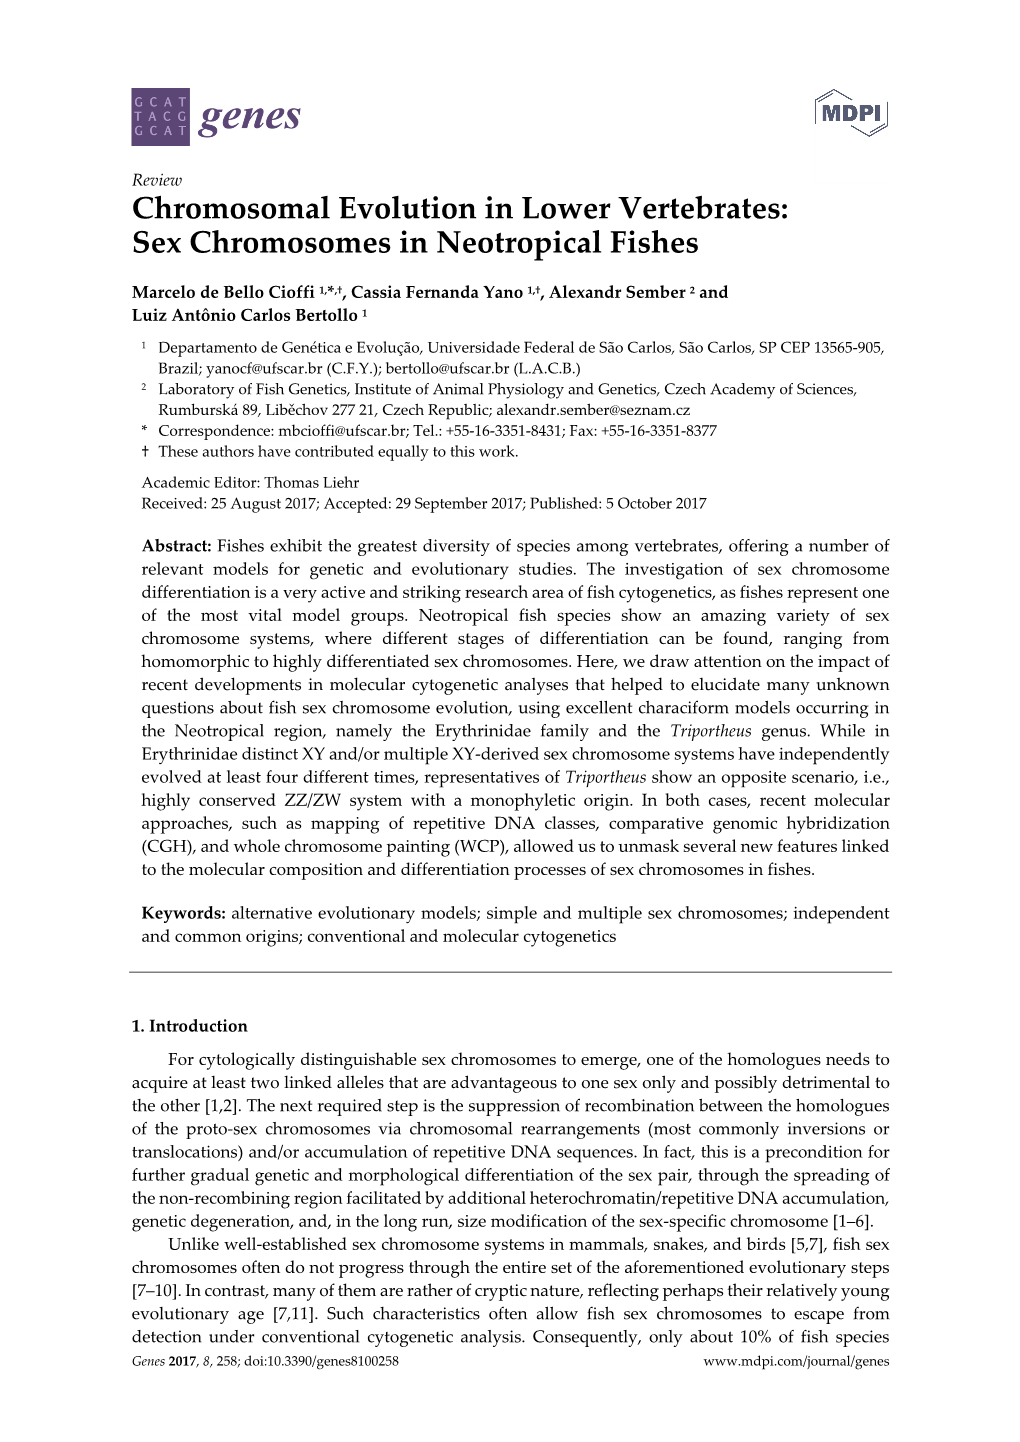 Sex Chromosomes in Neotropical Fishes